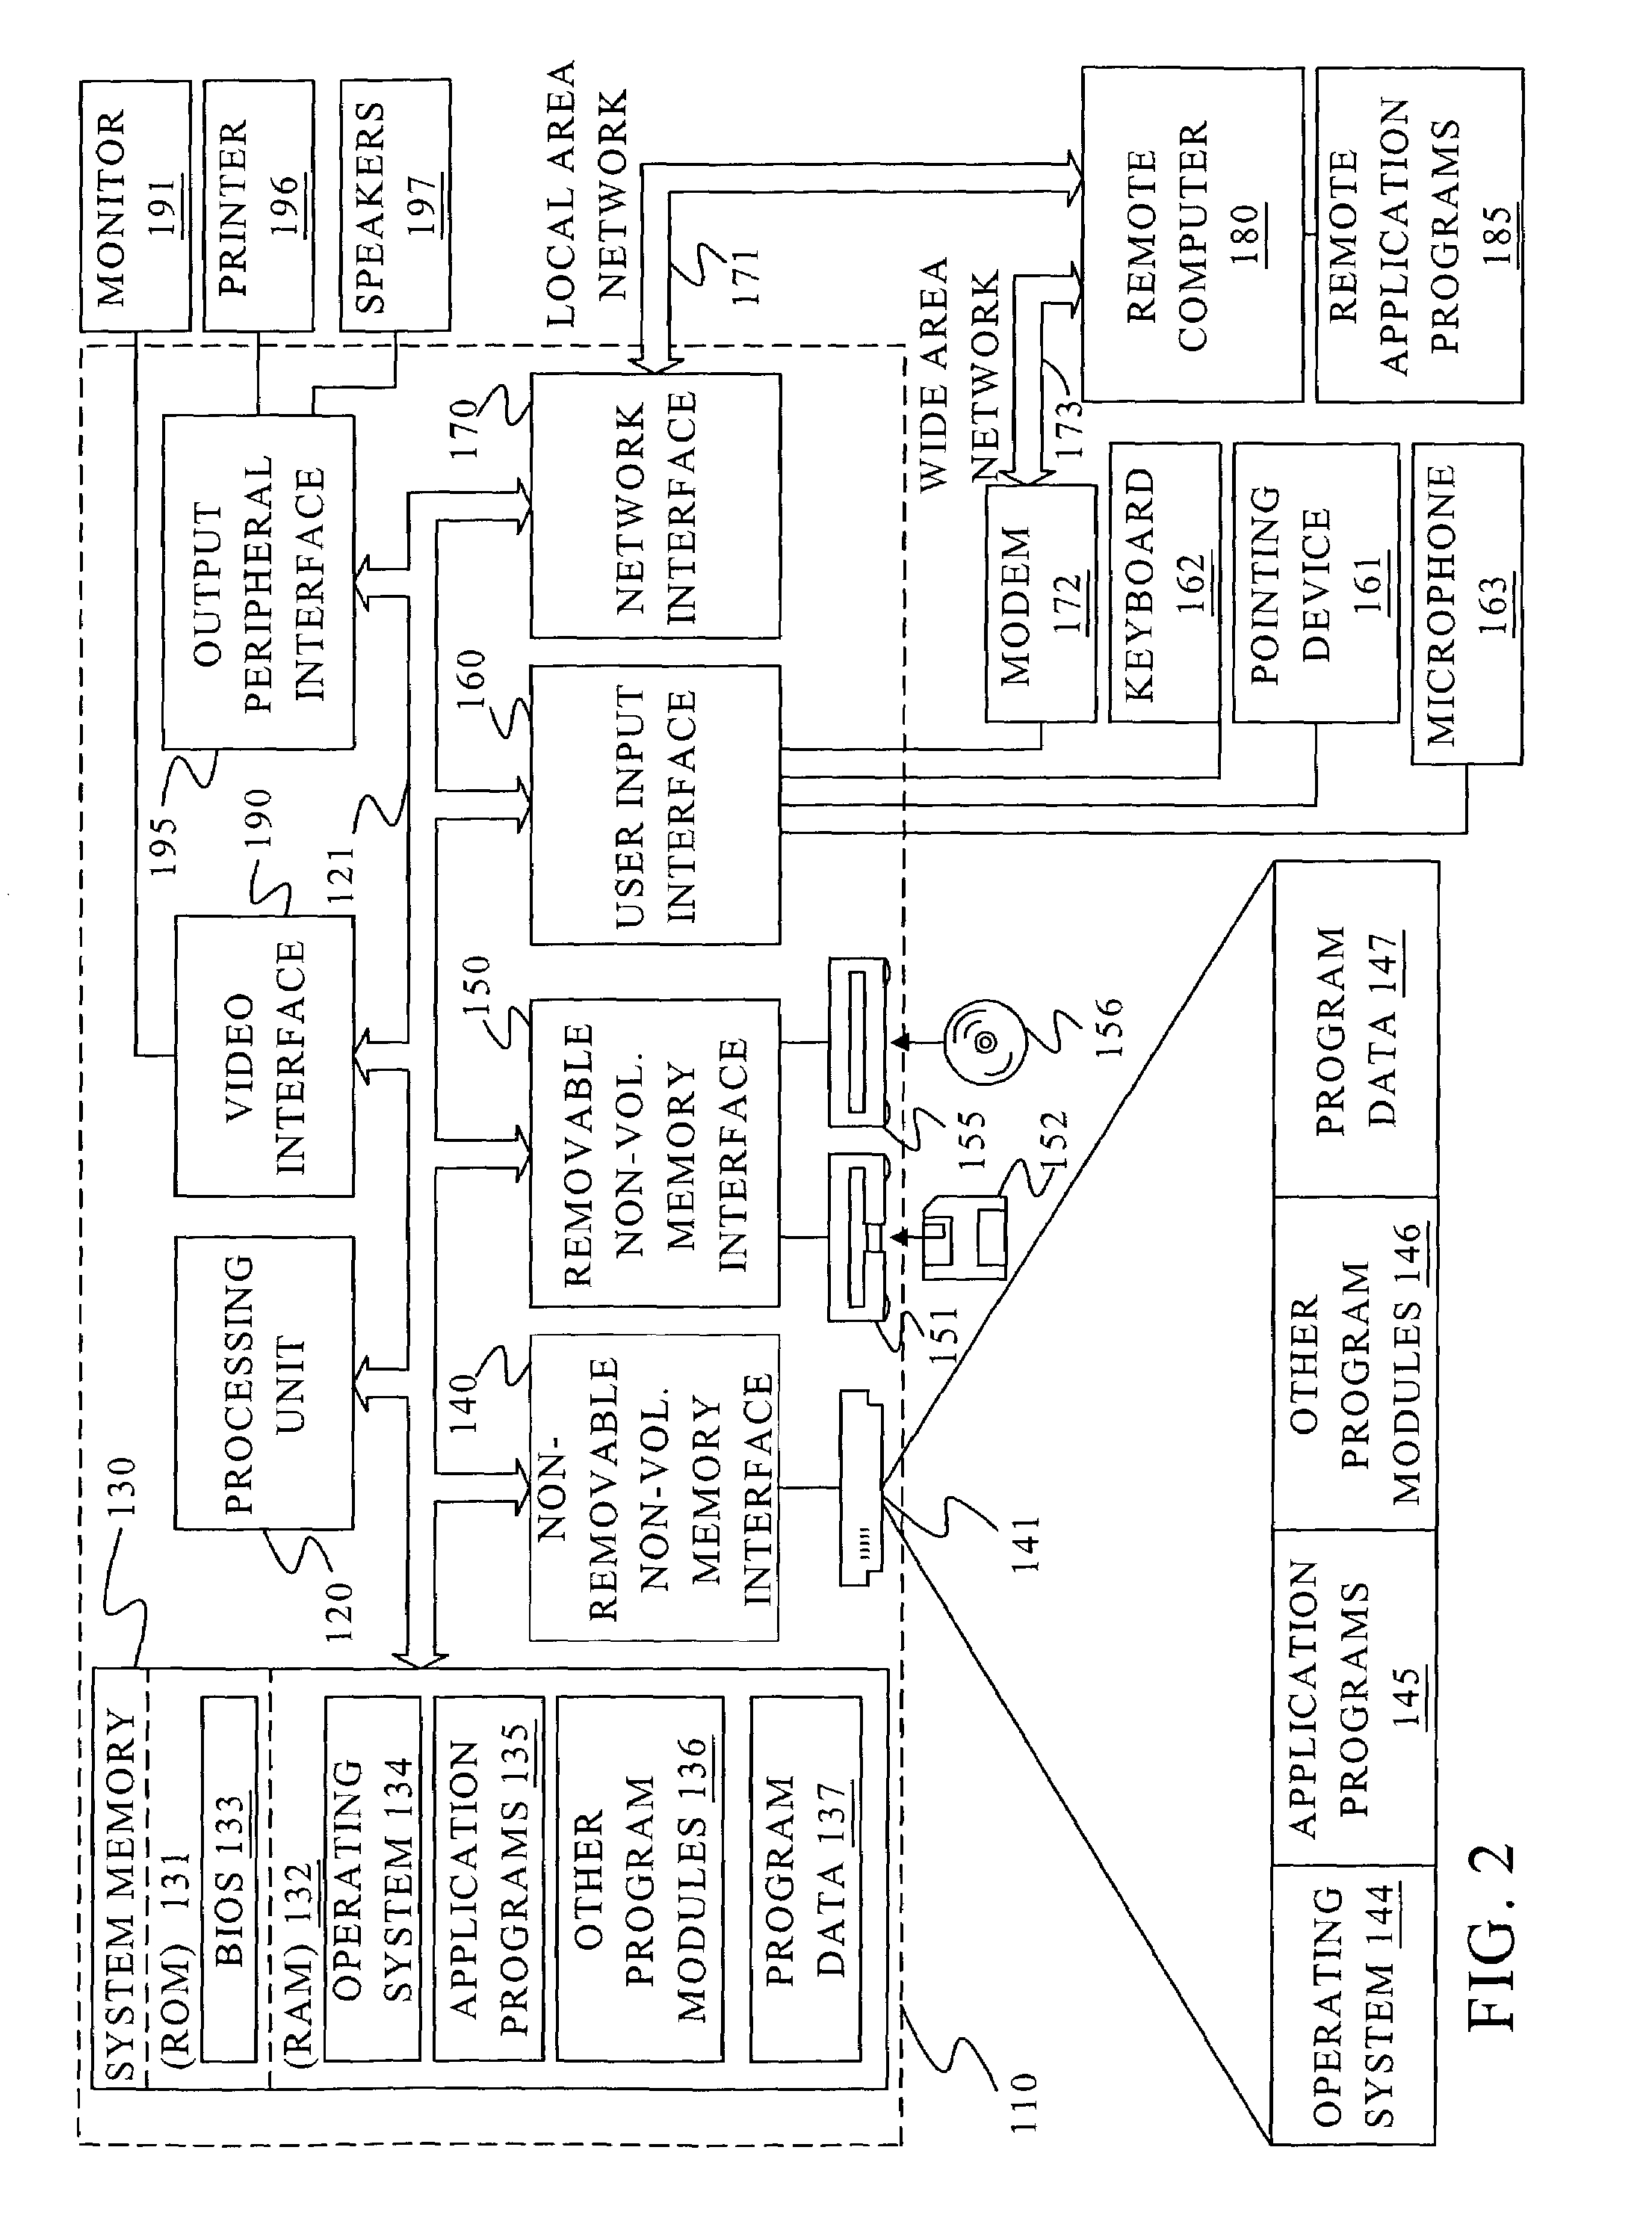 Object graph faulting and trimming in an object-relational database system